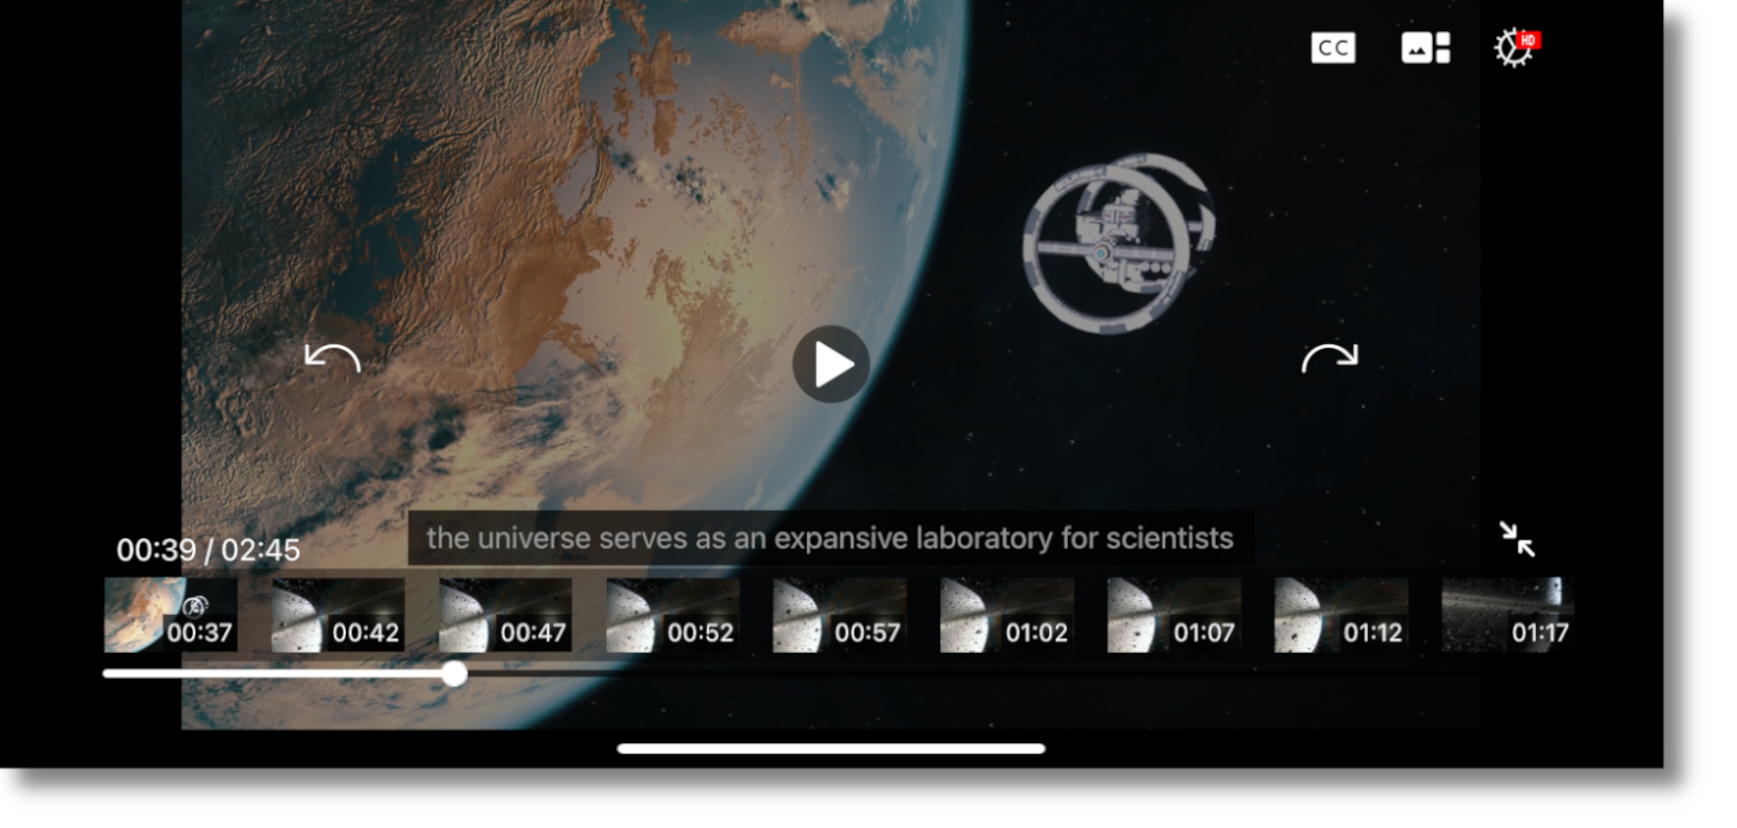 The new YuJa Video Player, featuring a video about space, with captions and thumbnails turned on.